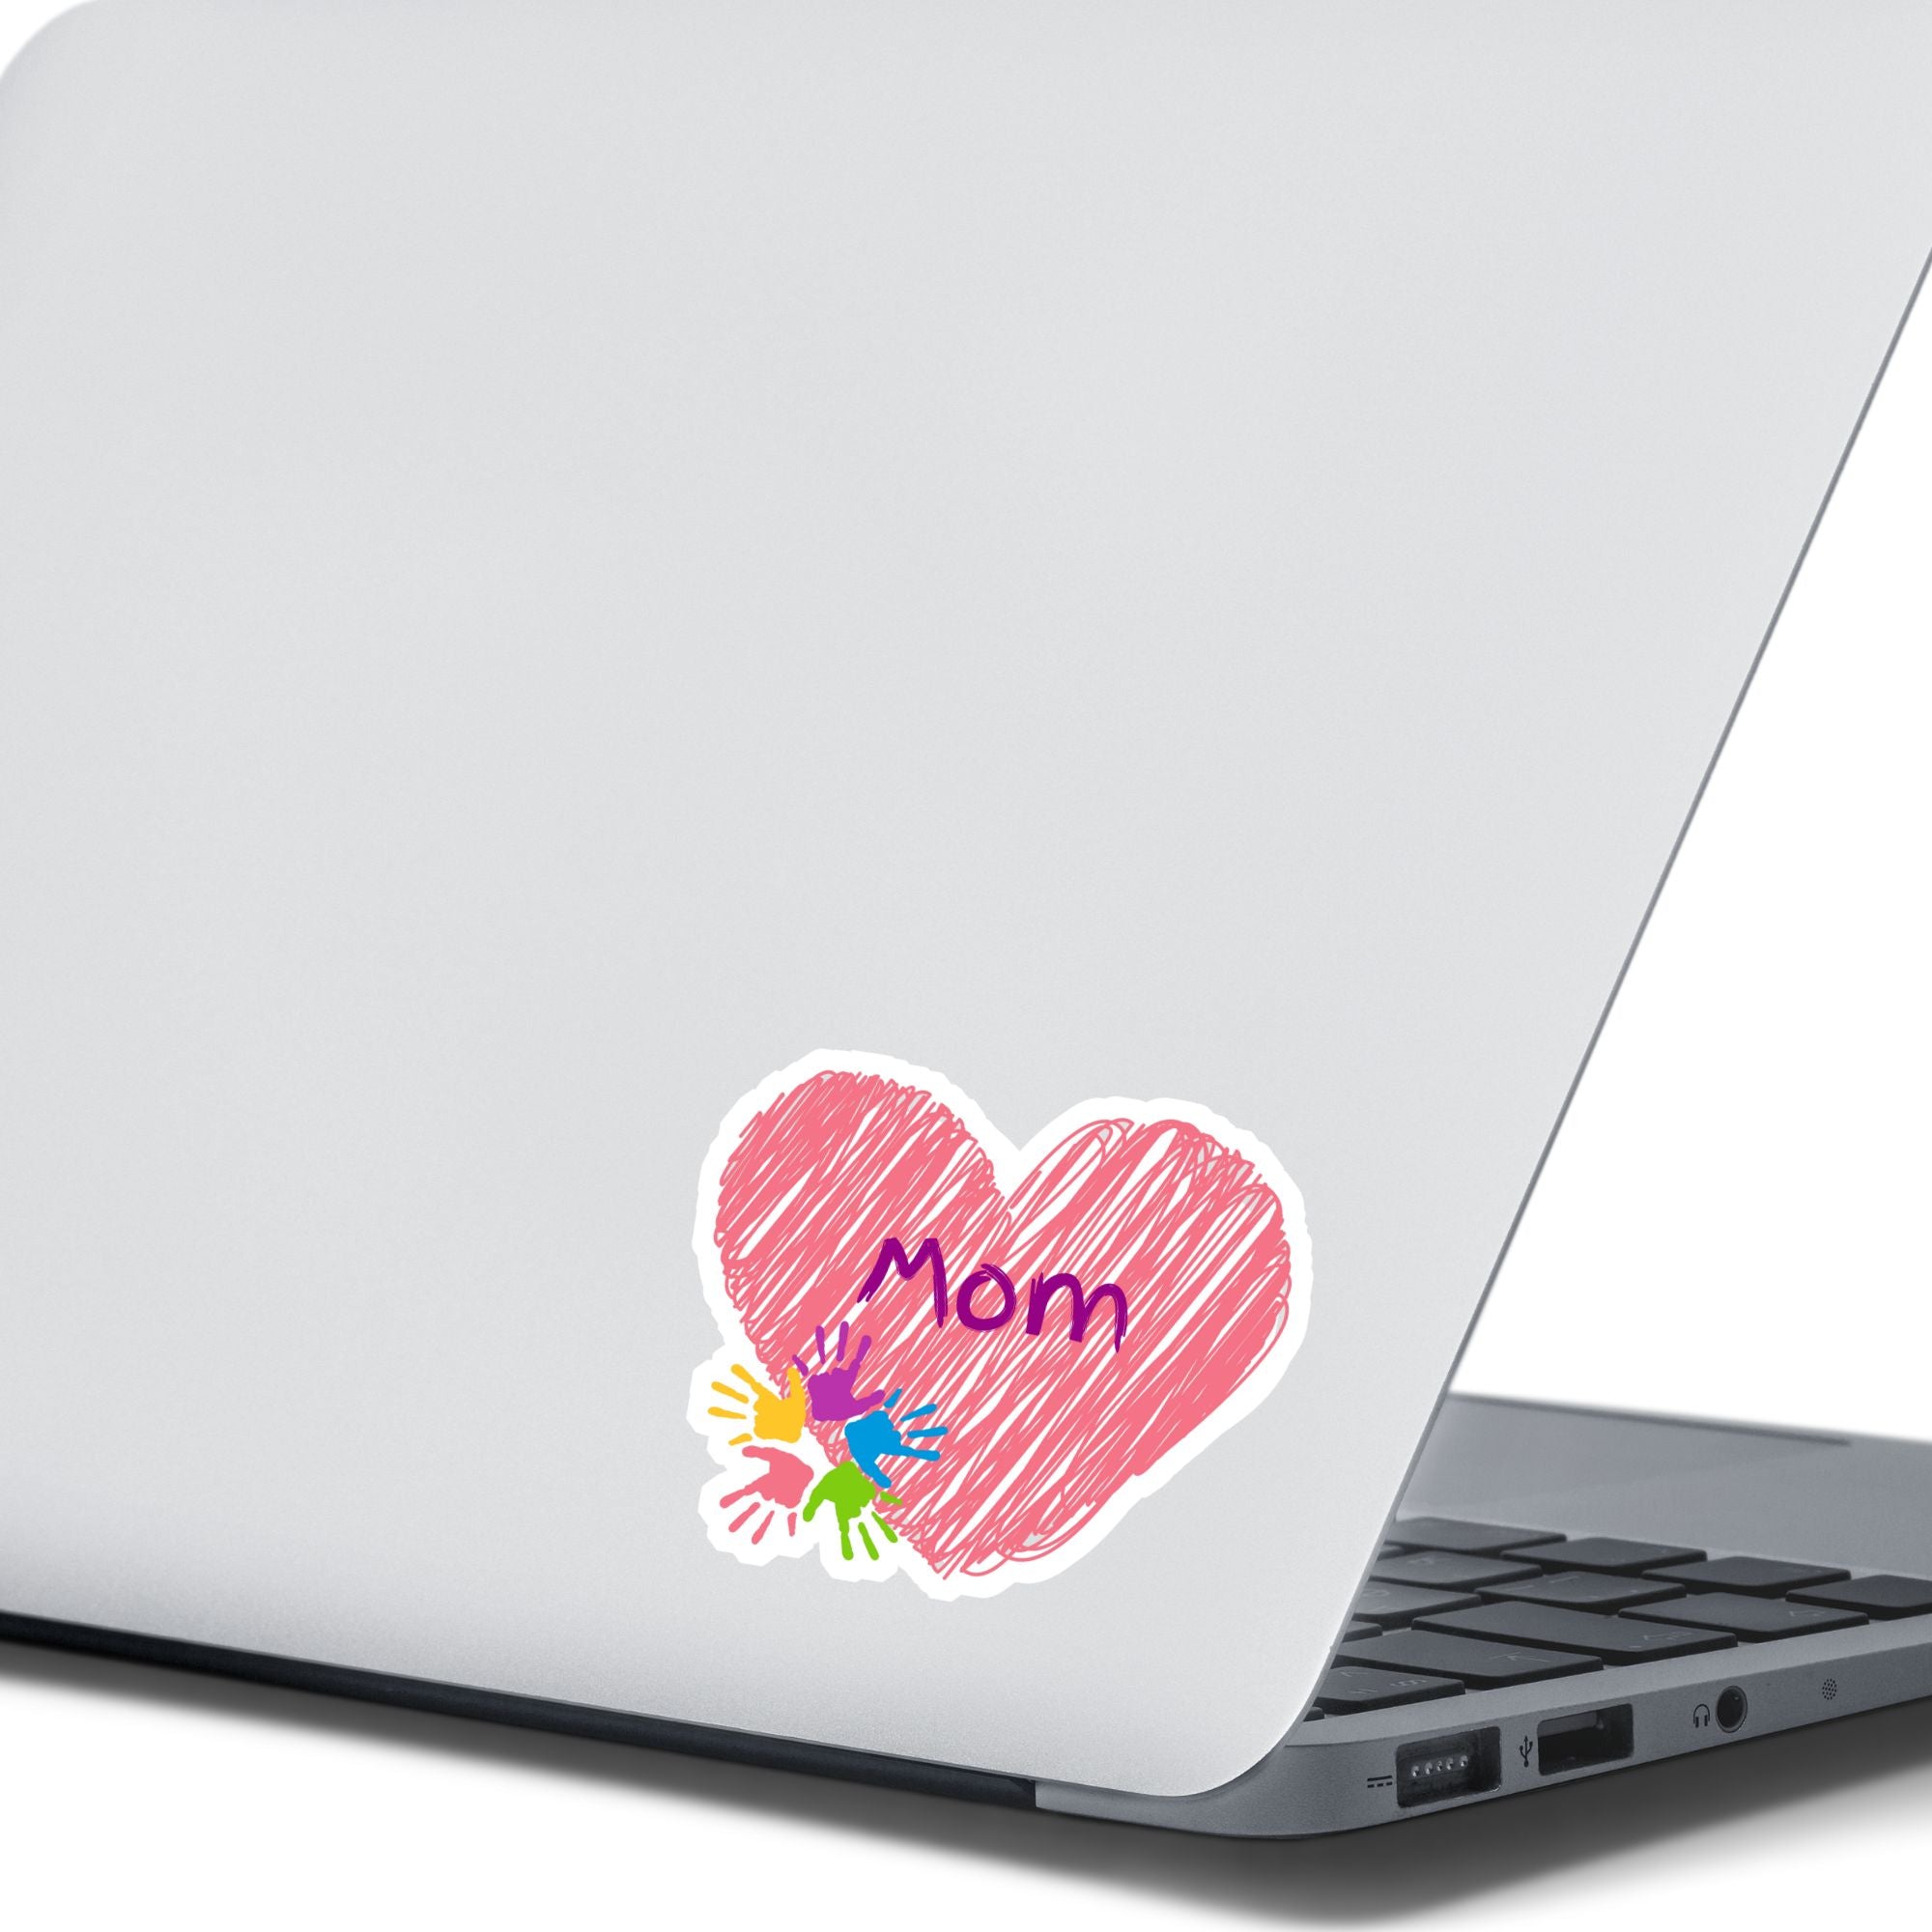 Show how much you love your mom with this individual die-cut sticker. This makes a great gift for mom, or for all mom's to proudly show they are a mother! This sticker features a pink scribbled heart with Mom written across the middle and 5 small paint hands on the lower left side. This image shows the Mom sticker on the back of an open laptop.